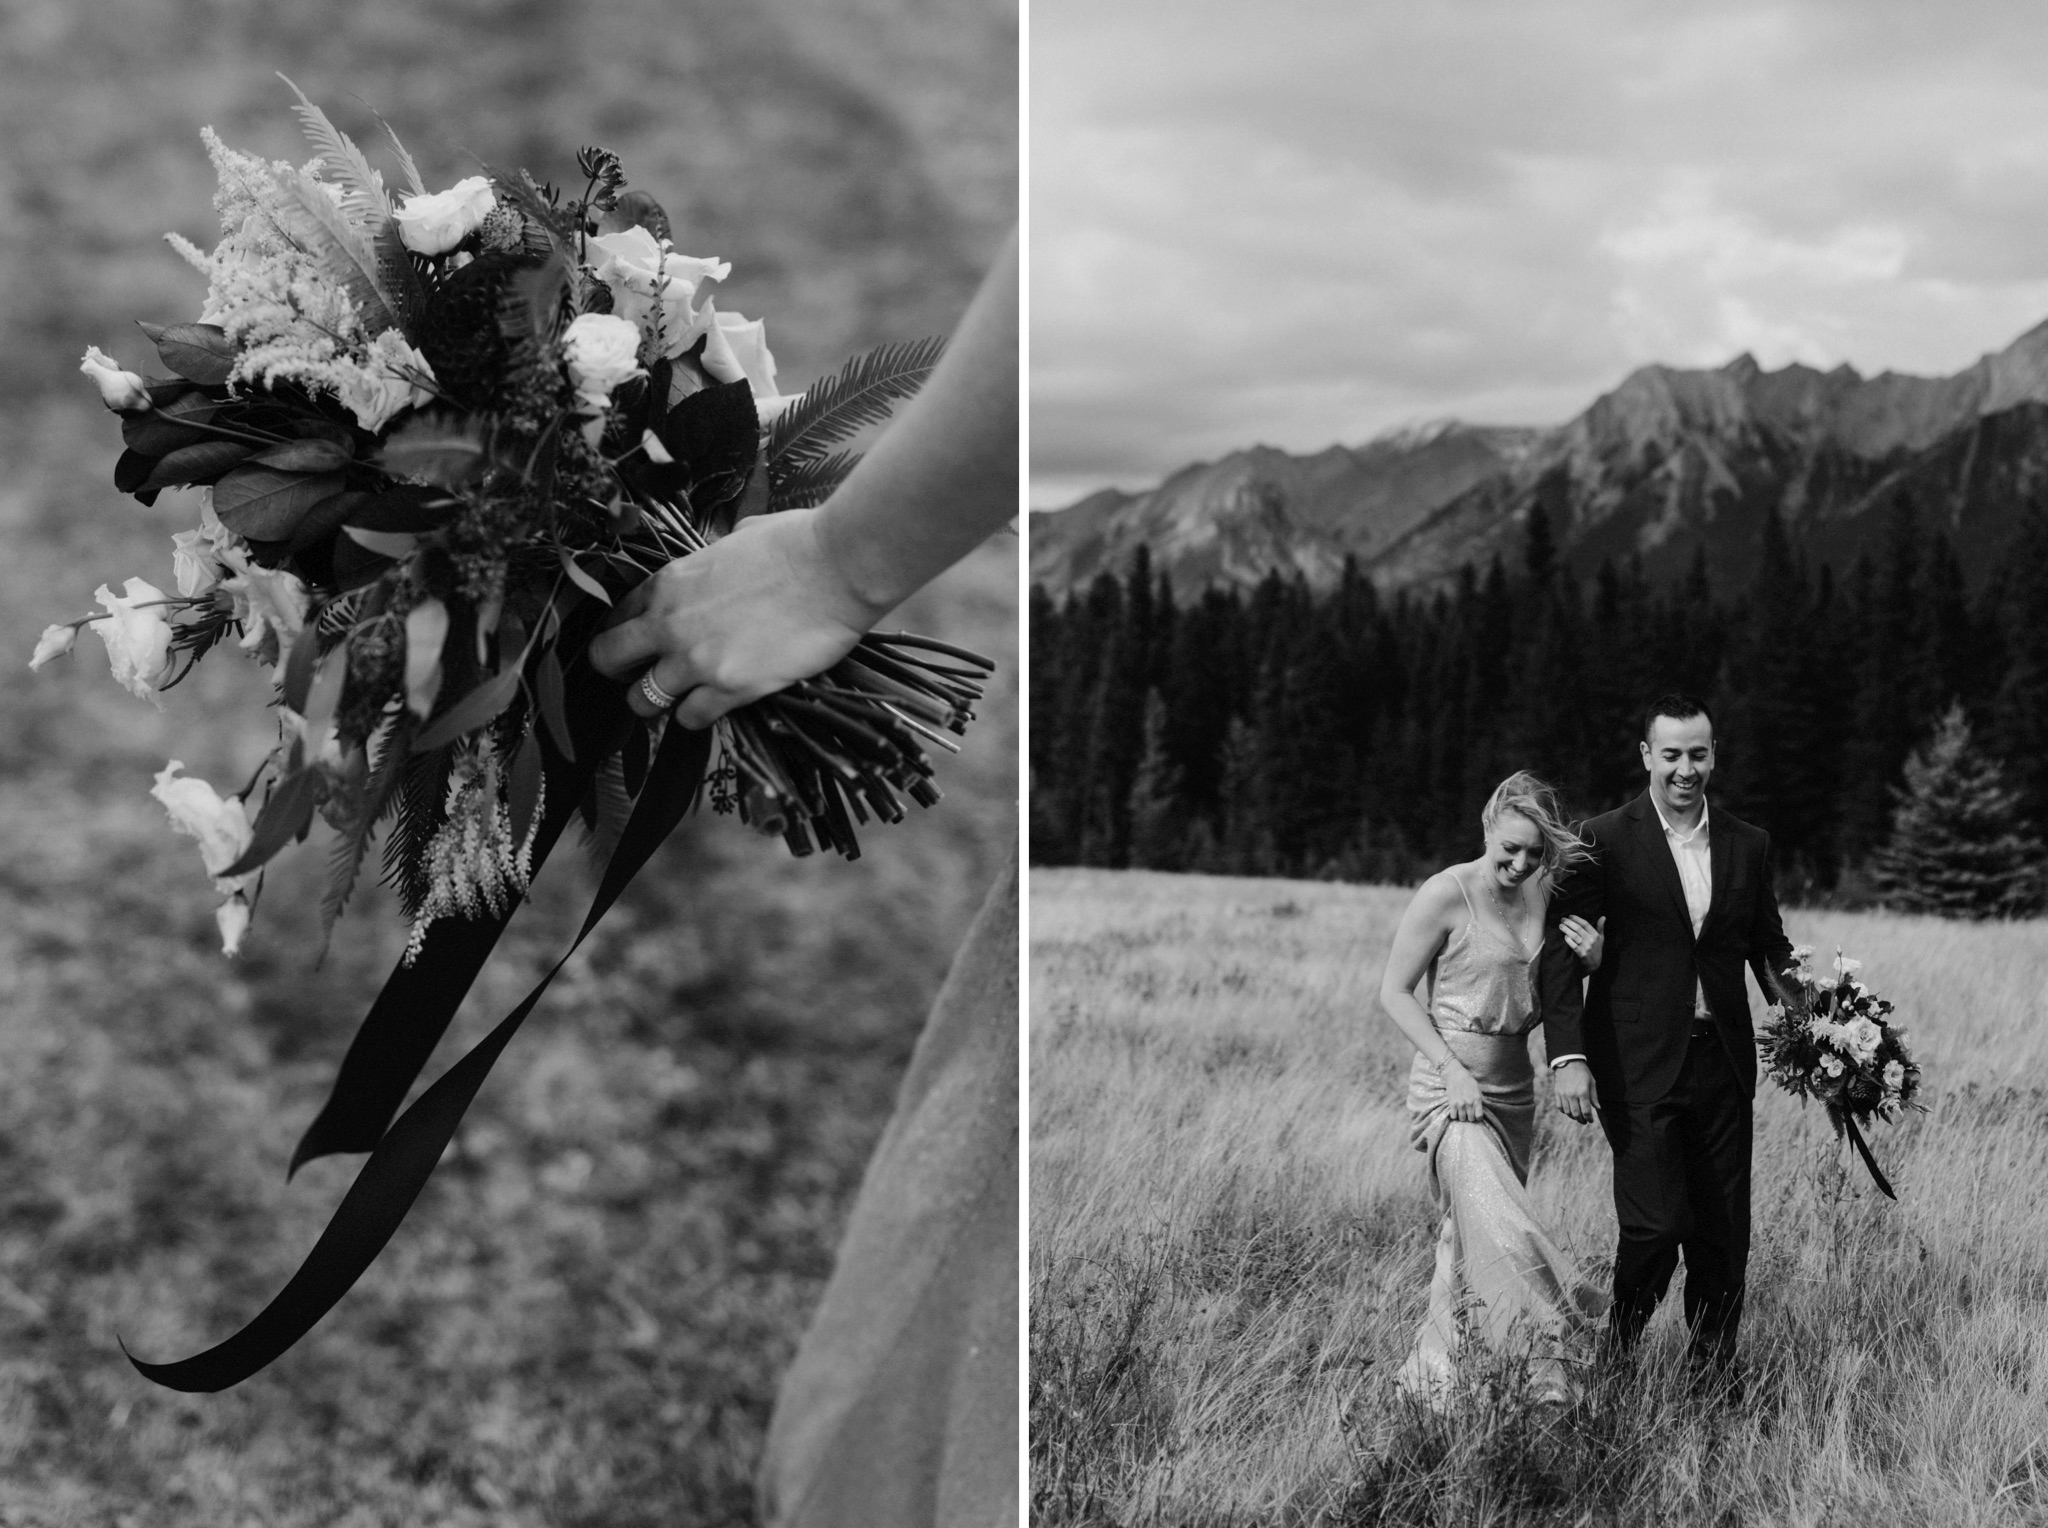 Quarry Lake wedding portrait location with gold sequenced gown